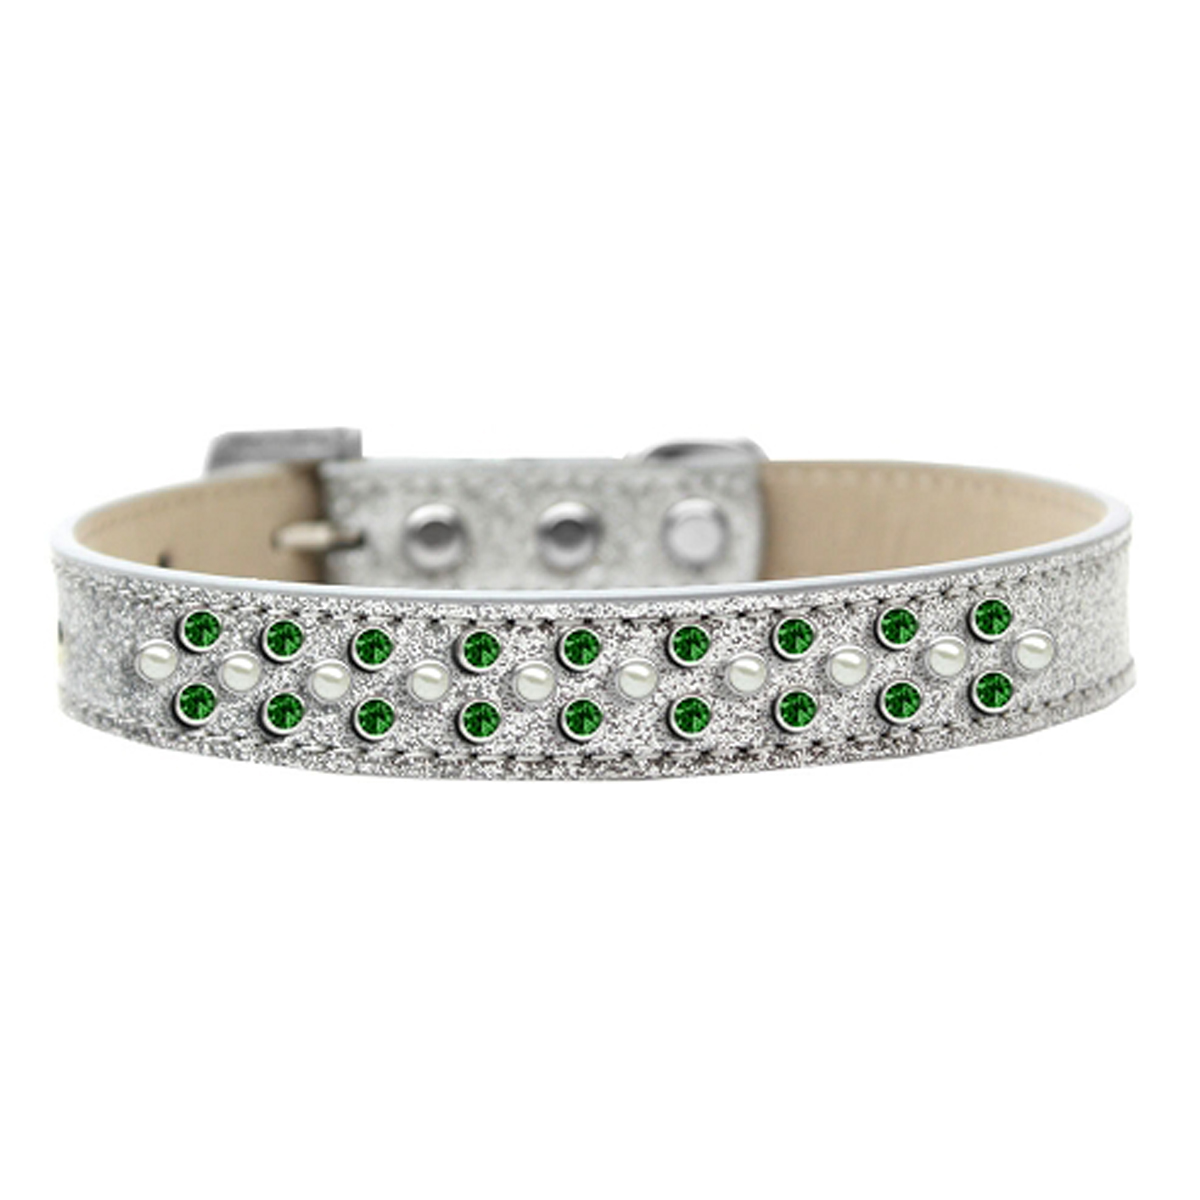 Sprinkles Ice Cream Dog Collar - Pearl and Green Crystals on Silver